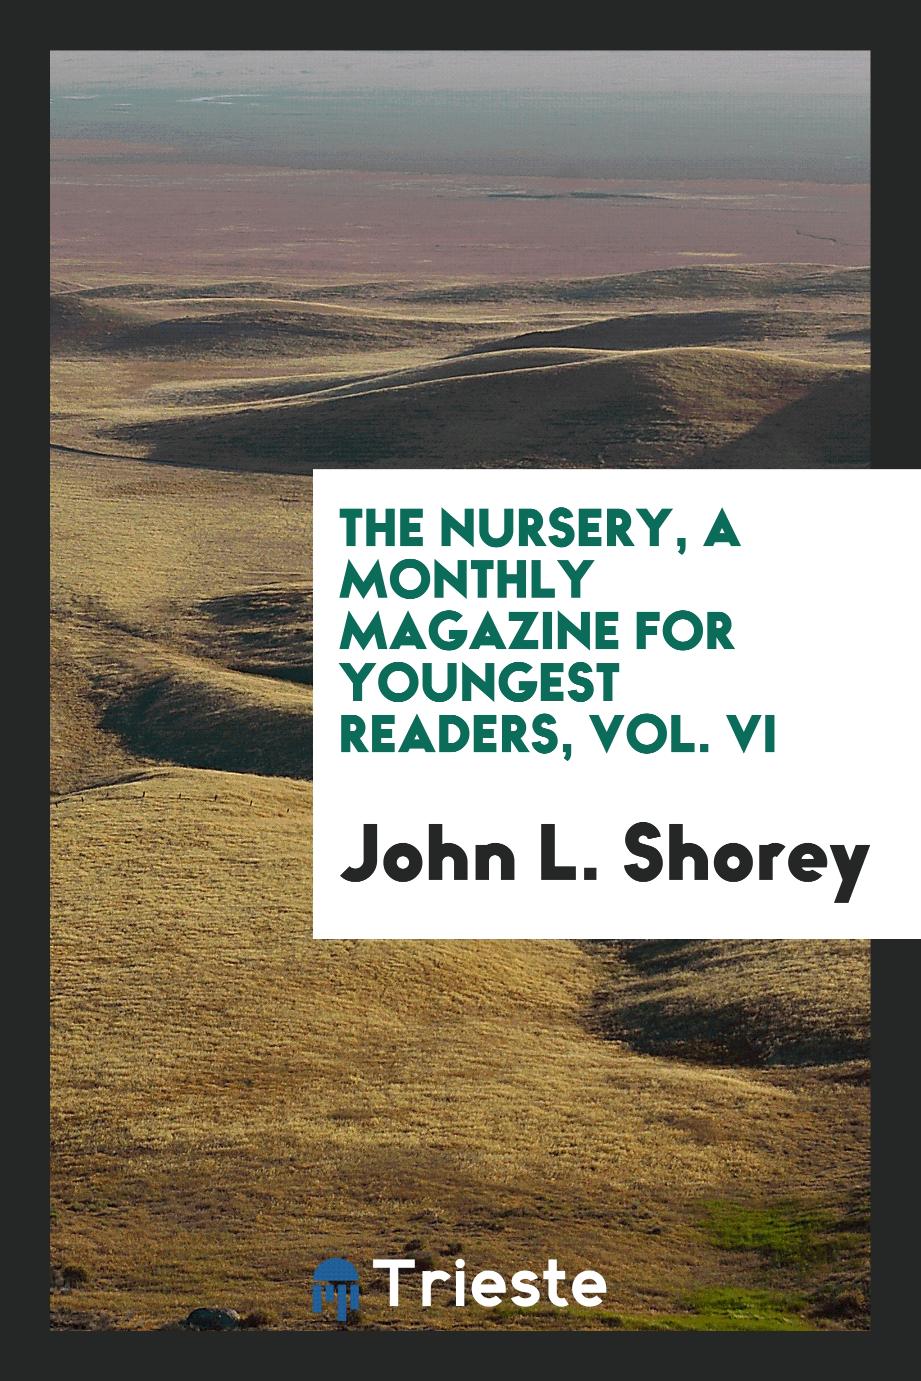 The Nursery, a Monthly Magazine for Youngest Readers, Vol. VI